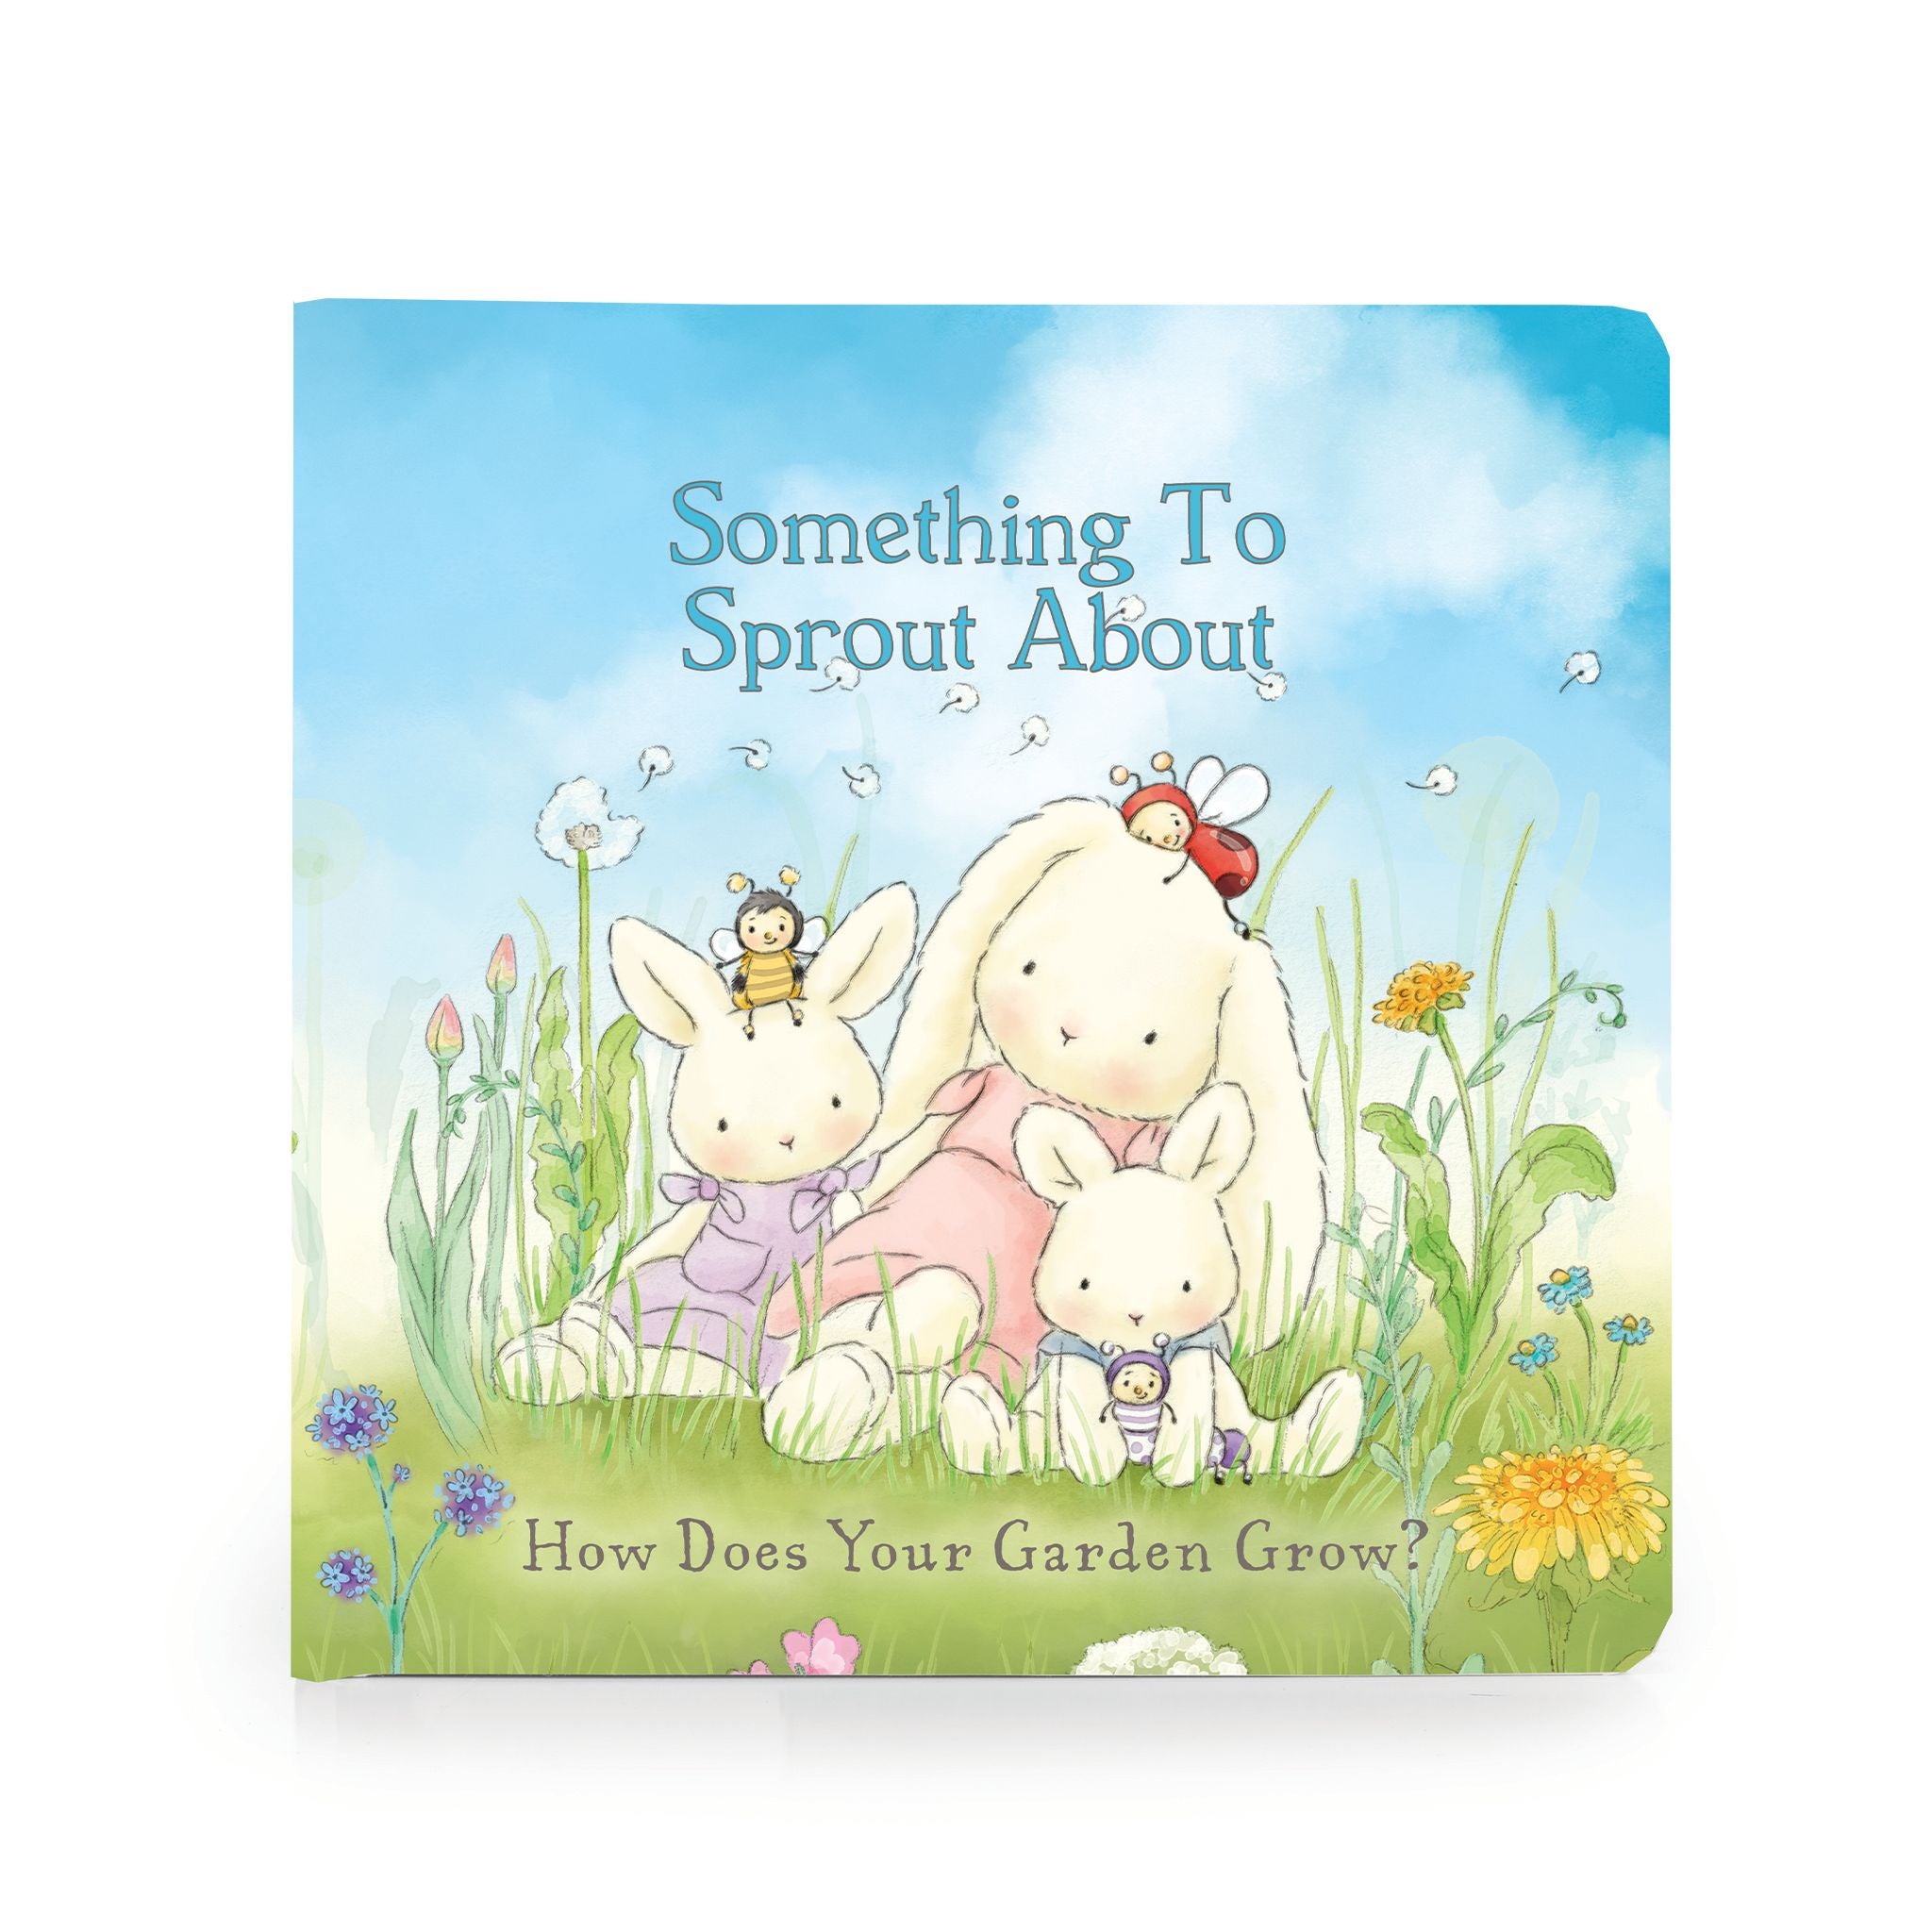 190277: Something To Sprout About Board Book